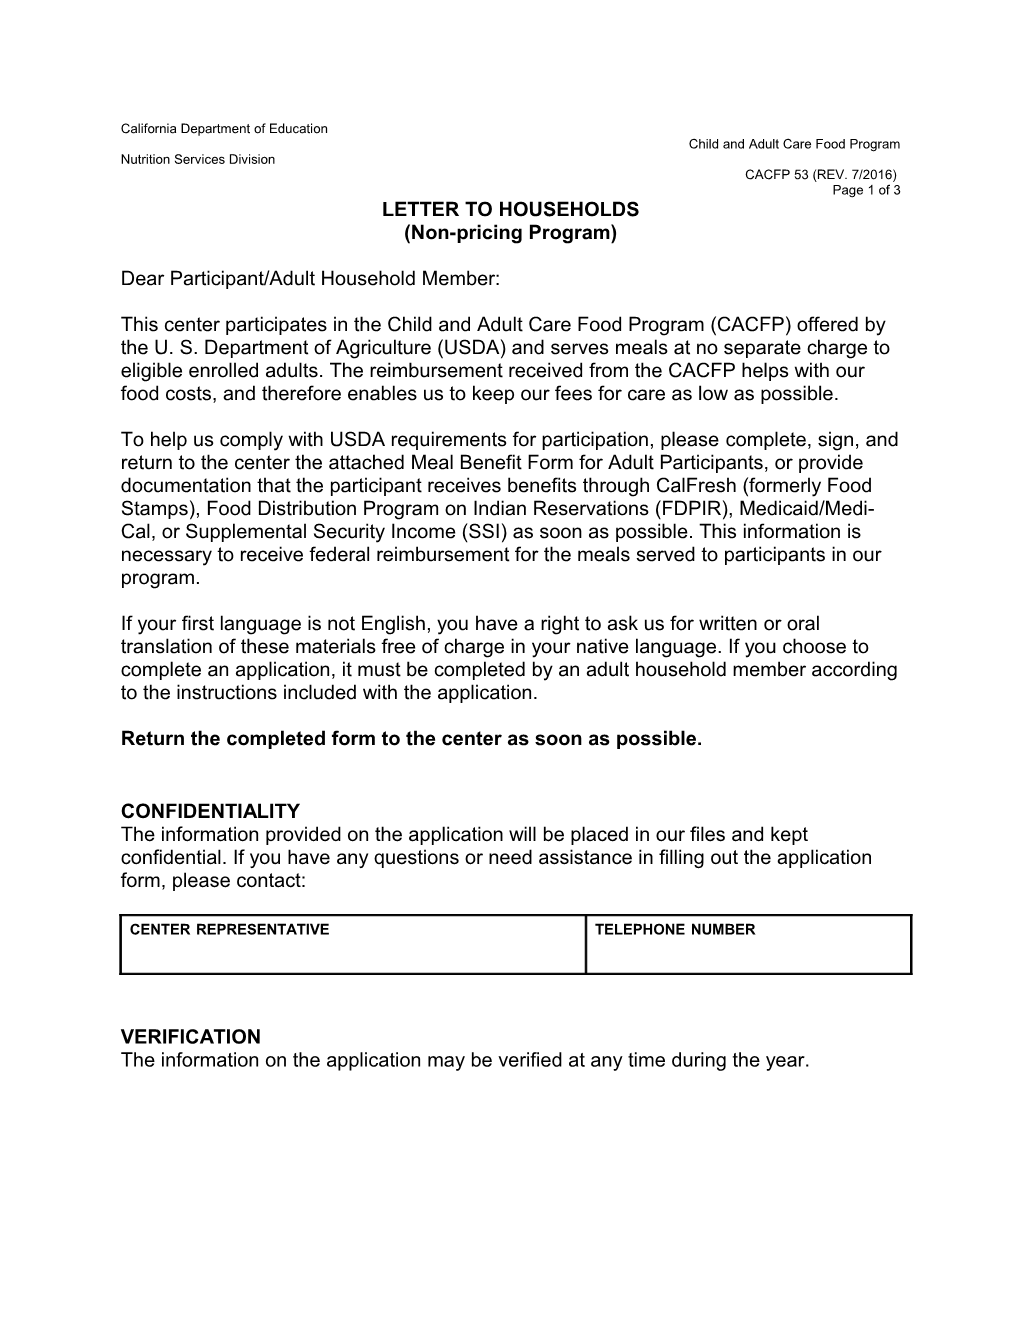 Letter to Households - Child and Adult Care Food Program (CA Dept of Education)